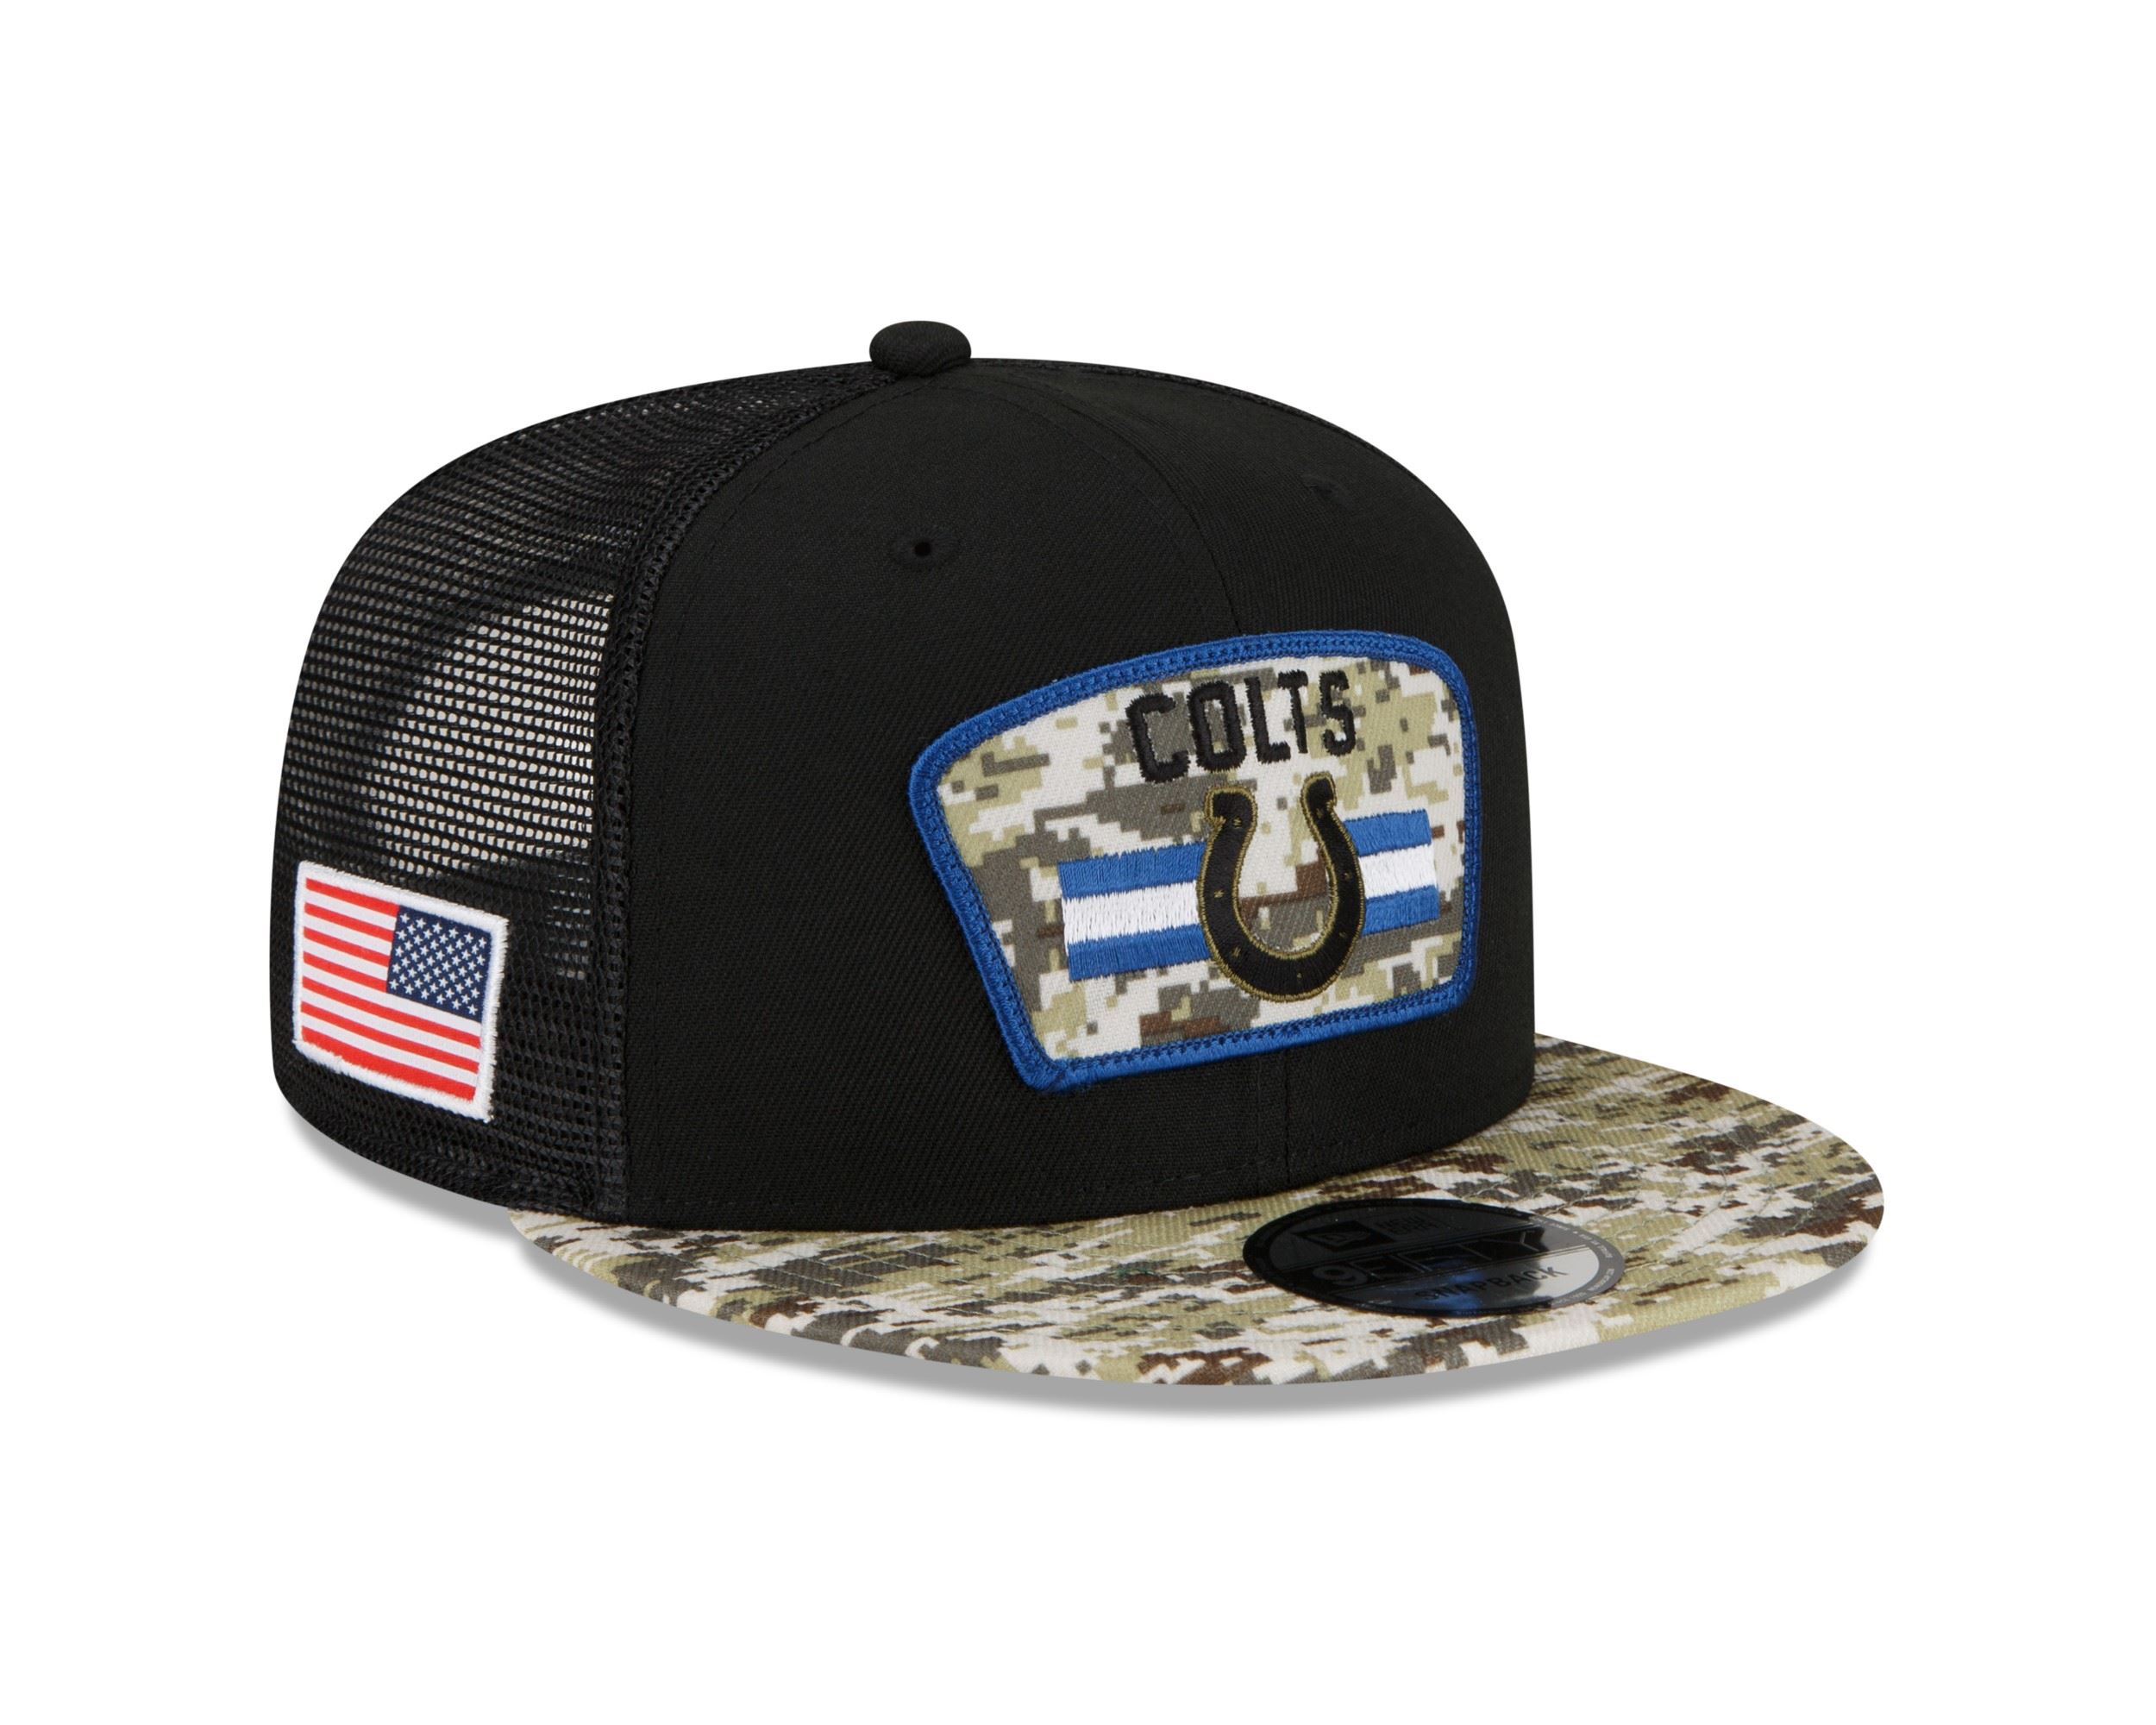 Indianapolis Colts NFL On Field 2021 Salute to Service Black 9Fifty Snapback Cap New Era